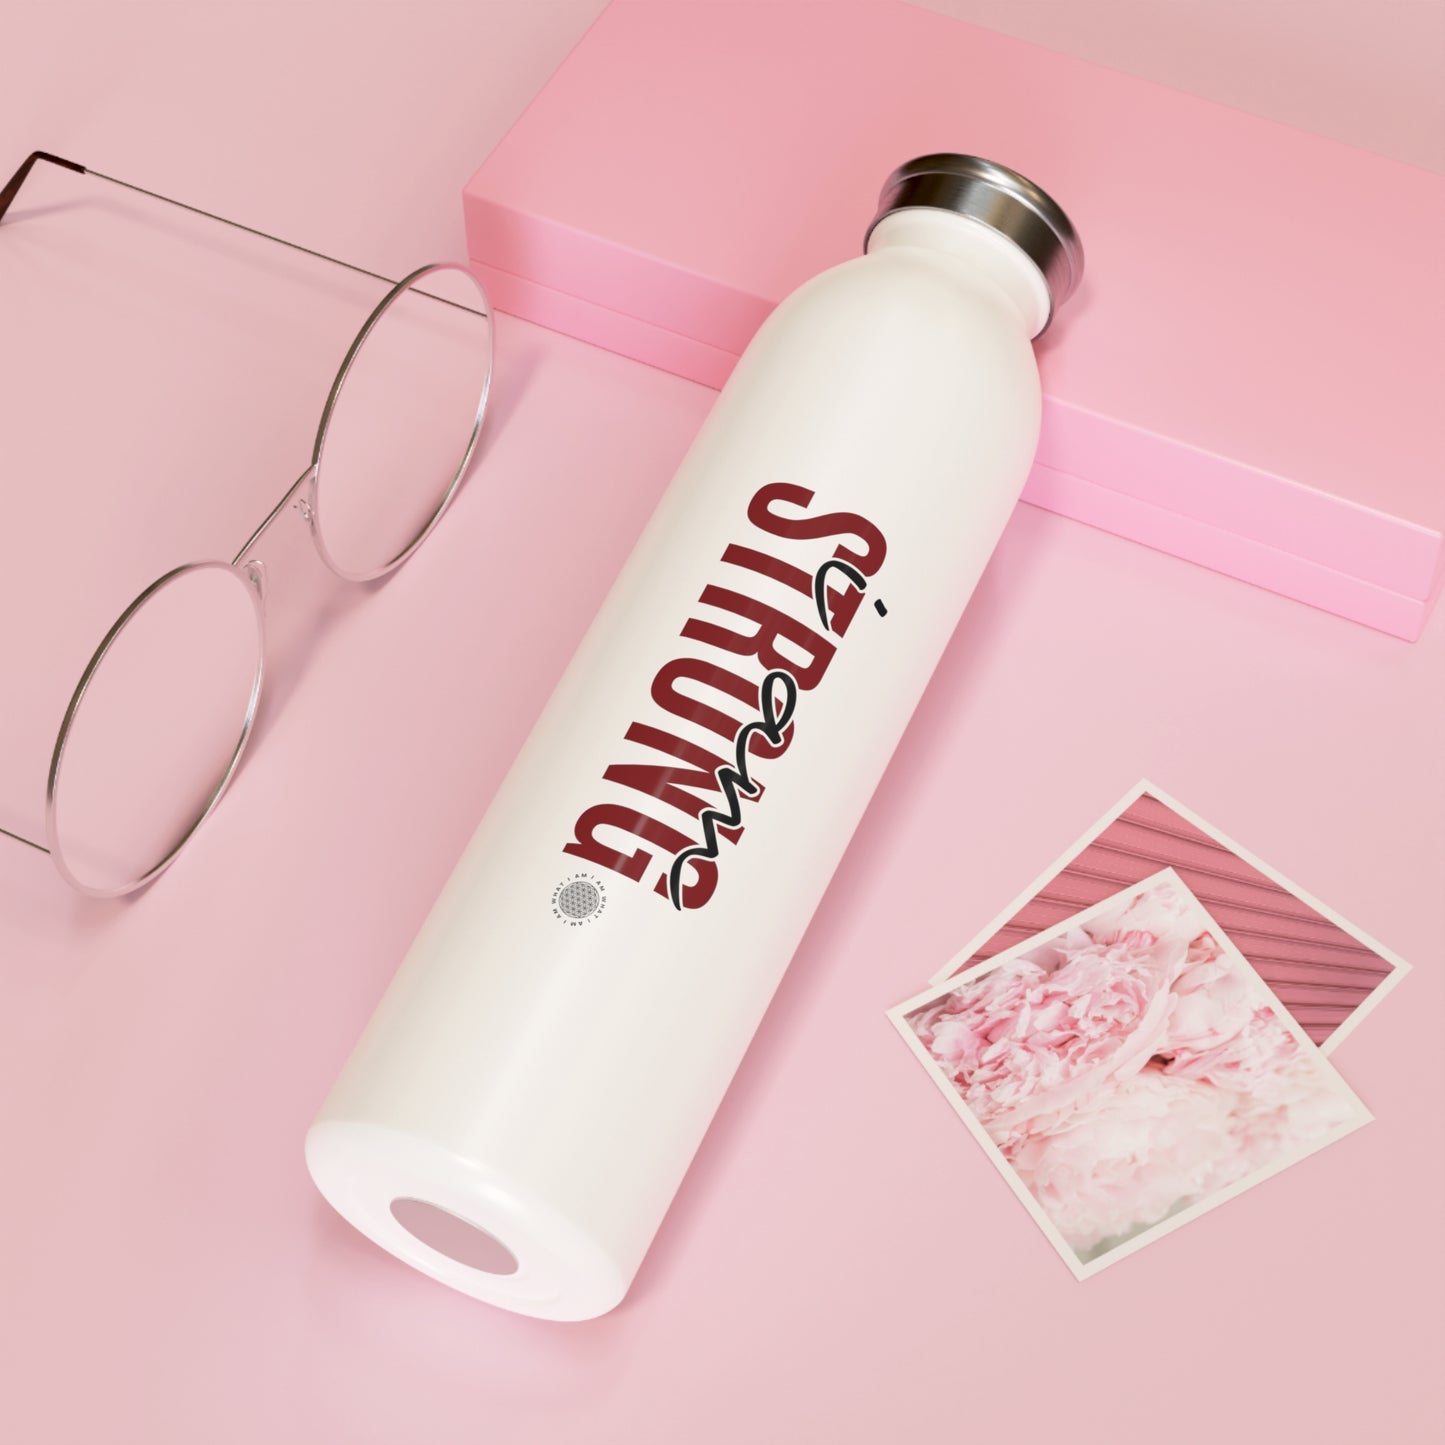 Our I Am Strong affirmation water bottle is one of our positive affirmations for mental health. Positive thinking keeps our mindset happy and healthy. This personalized water bottle was designed to become a creator’s favorite canvas of expression.